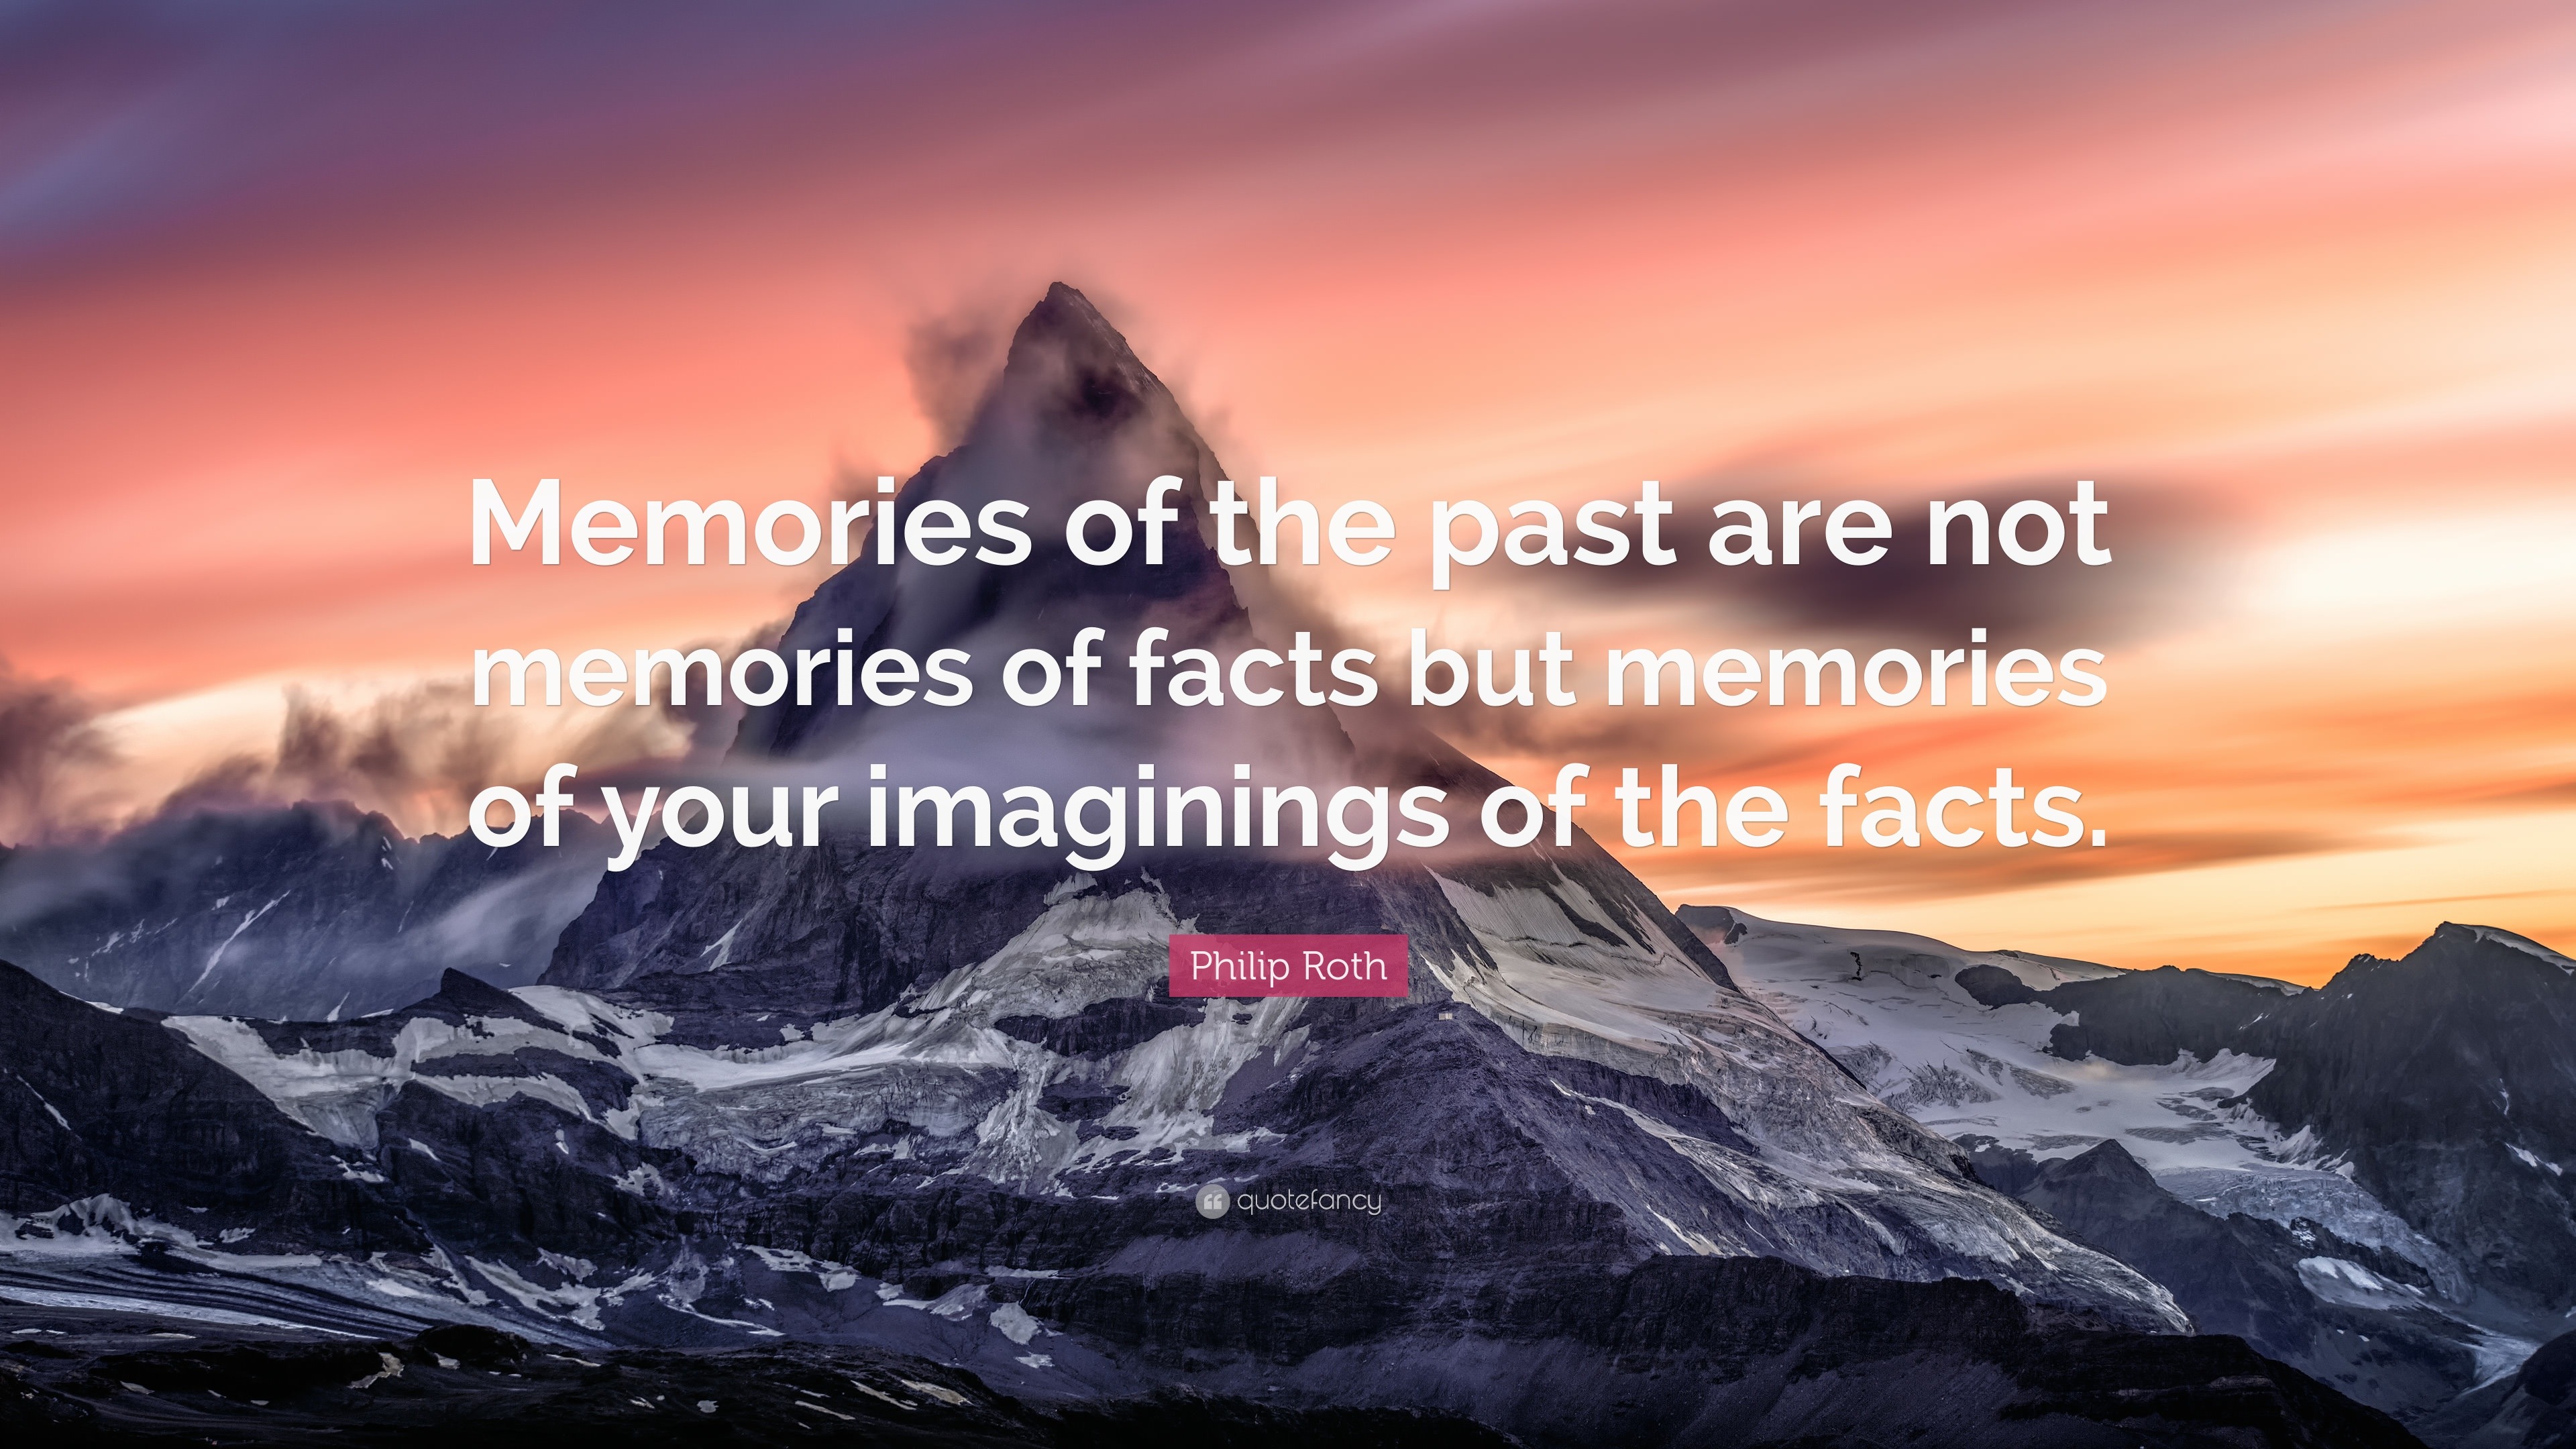 Philip Roth Quote: “Memories of the past are not memories of facts but ...